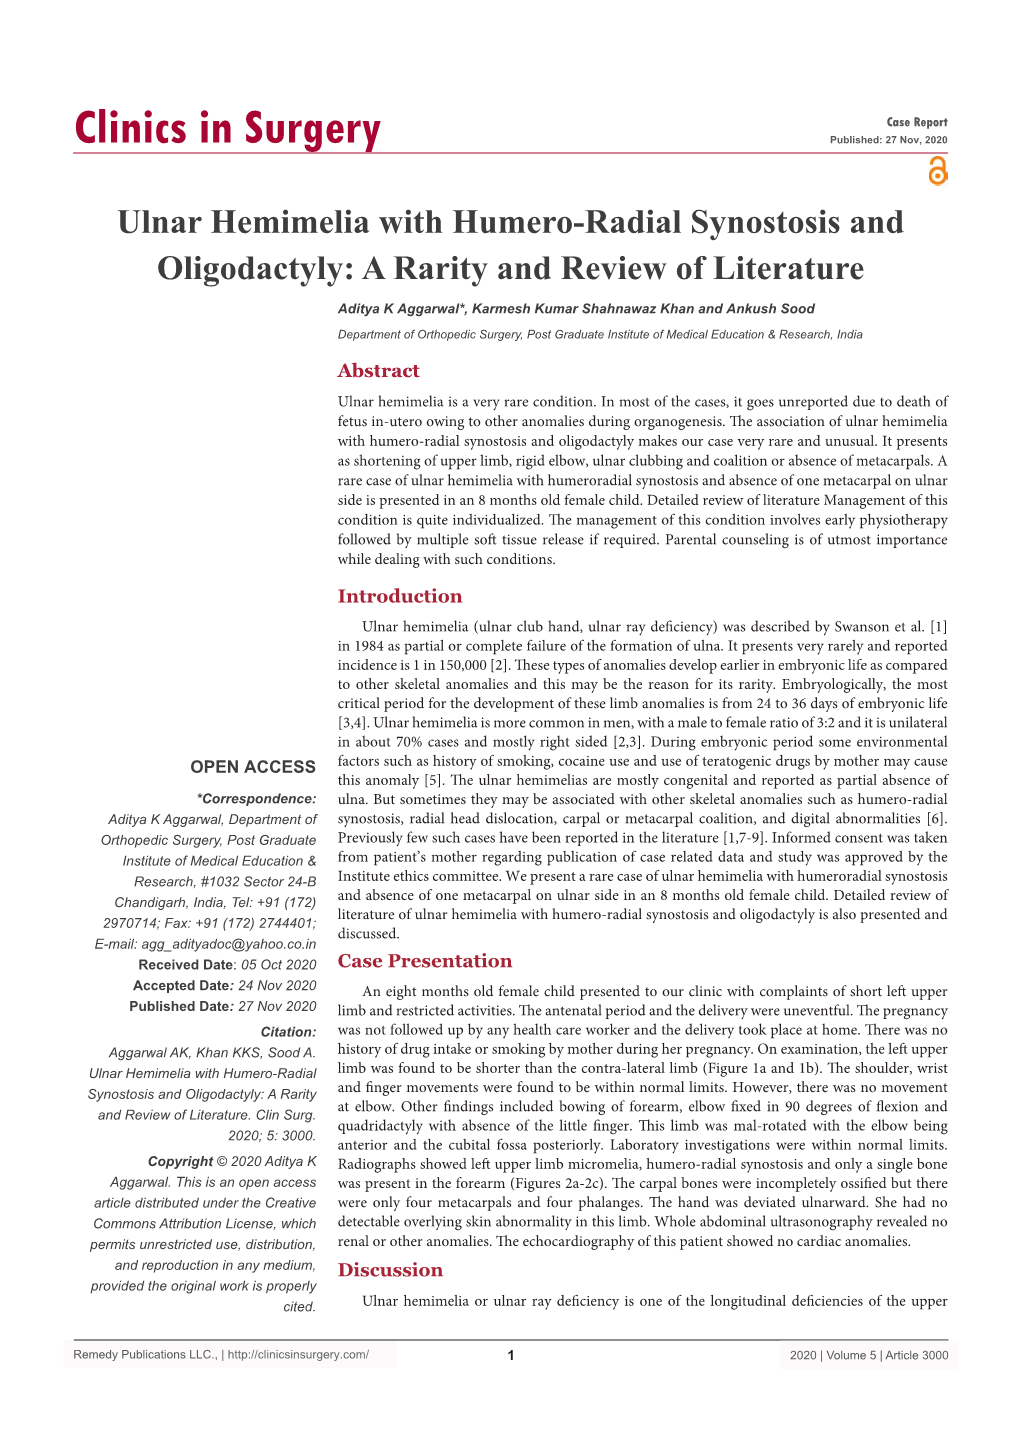 Ulnar Hemimelia with Humero-Radial Synostosis and Oligodactyly: a Rarity and Review of Literature